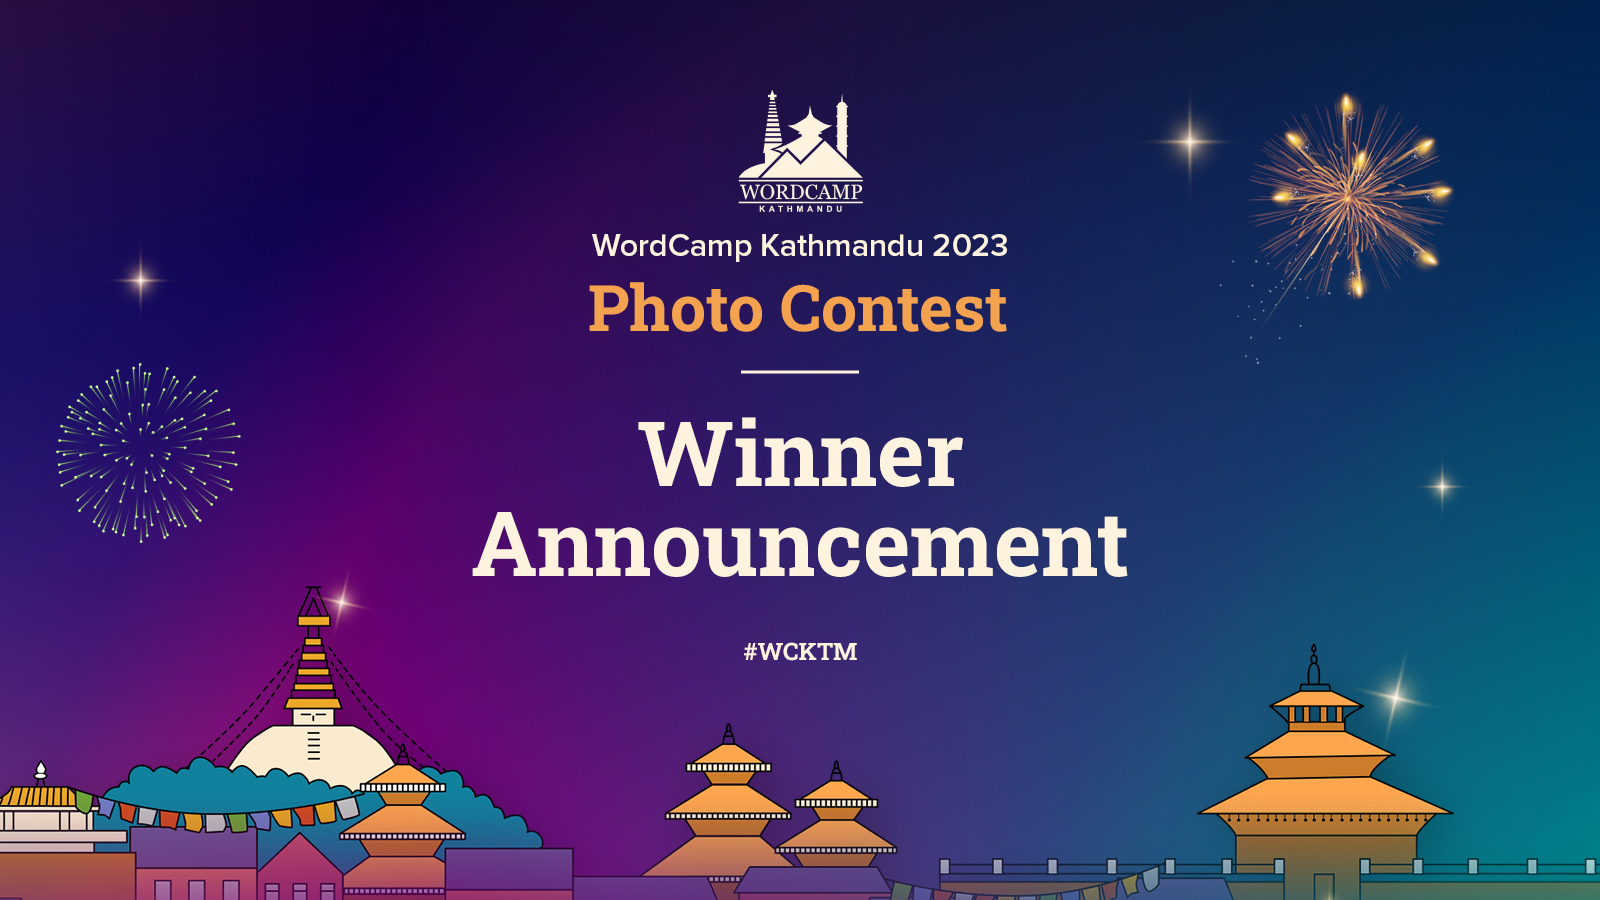 Announcing the Winners of Photo Contest #WCKTM